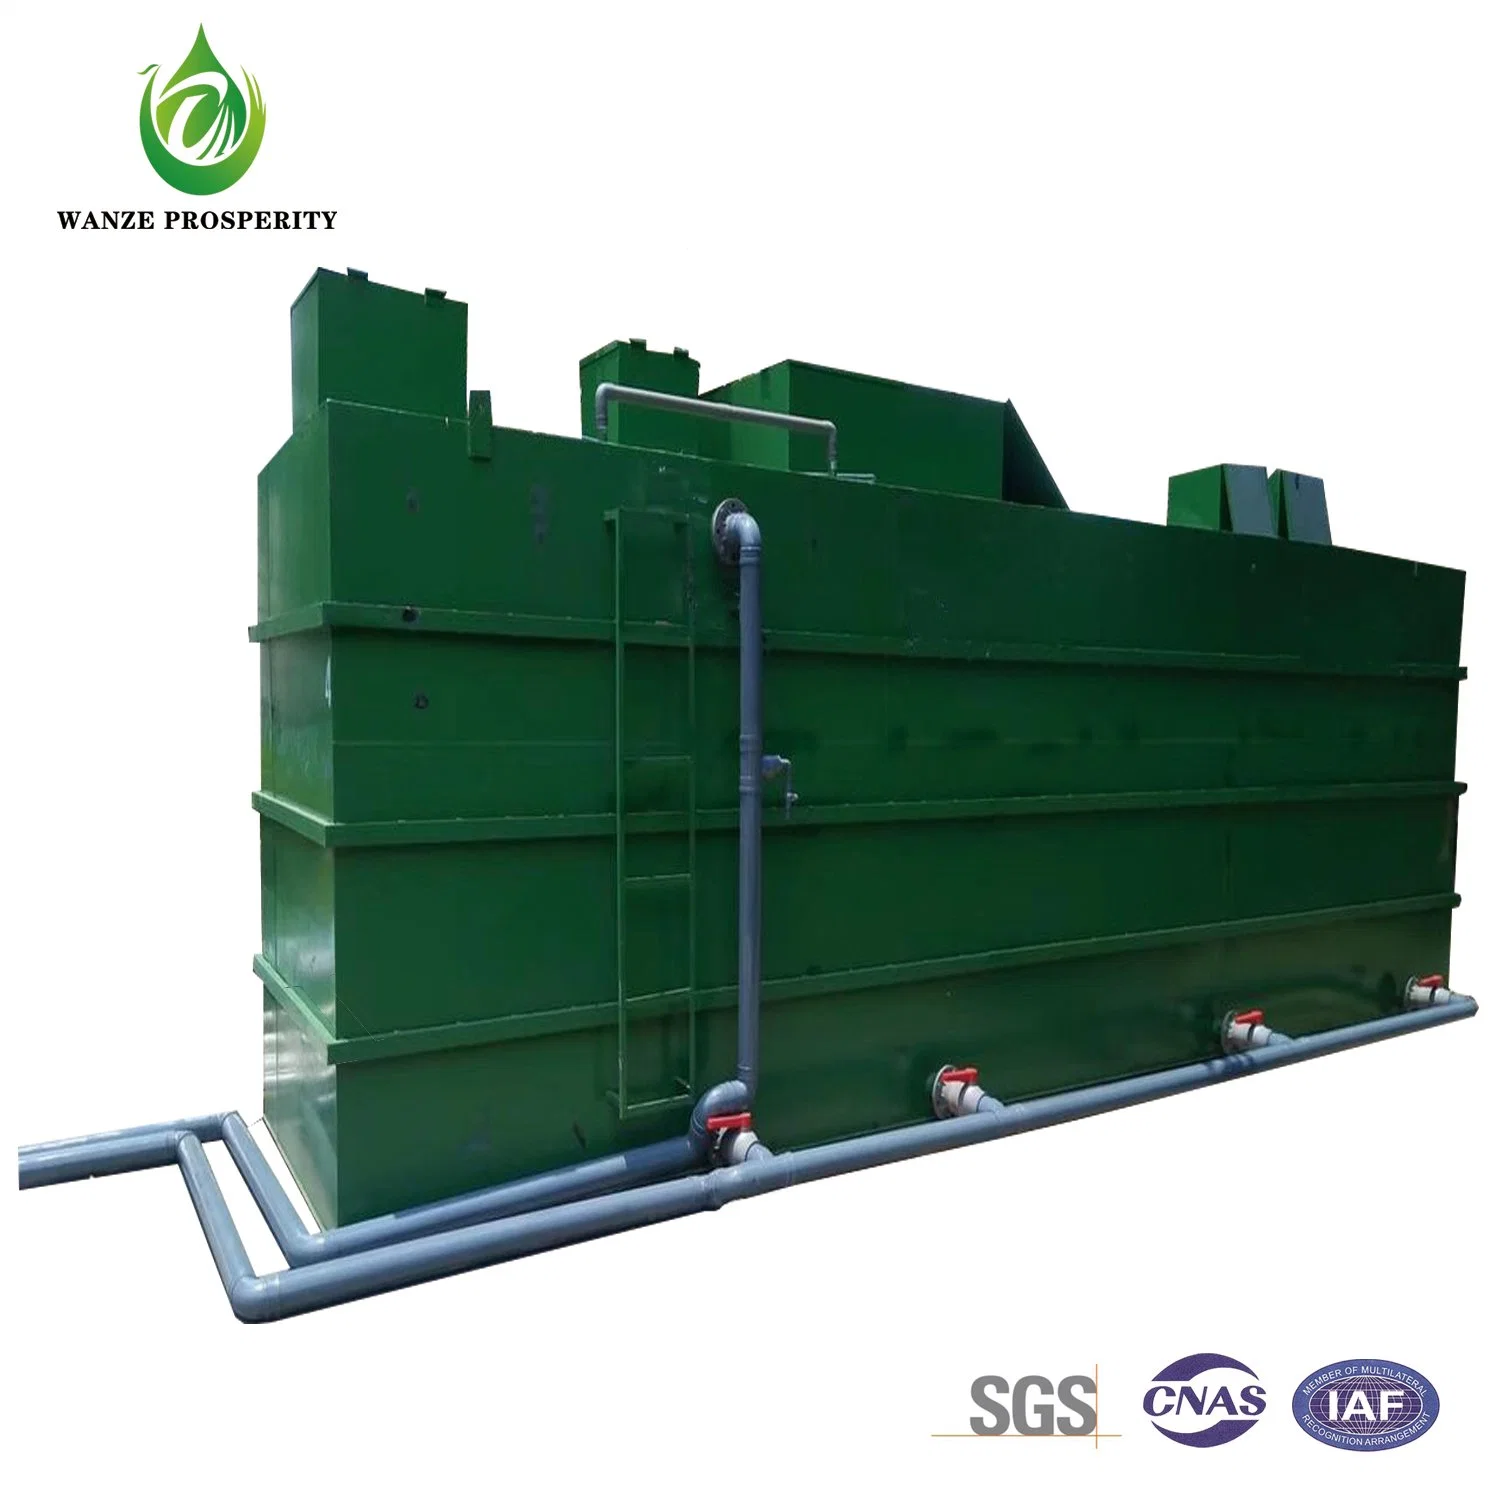 Comprehensive Wastewater Treatment Device for Farms/Aquaculture Cooperatives